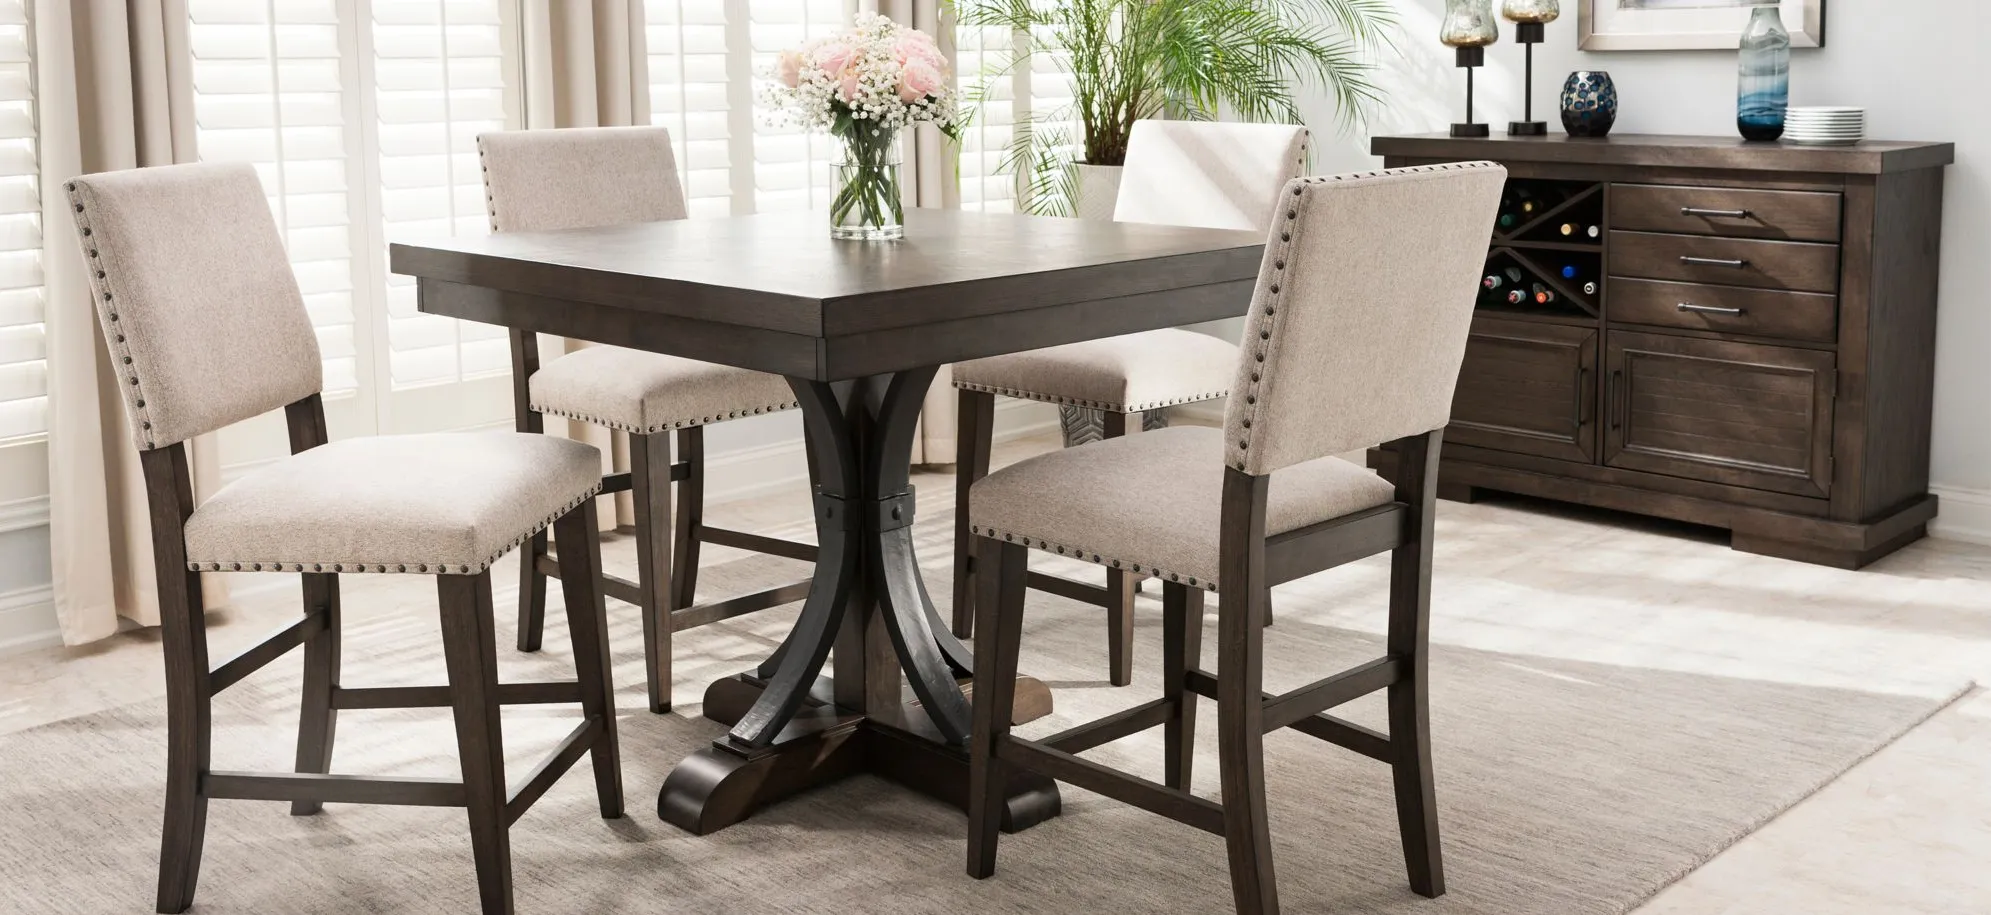 Halloway 5-pc. Counter-height Dining Set in Gray / Espresso by Davis Intl.